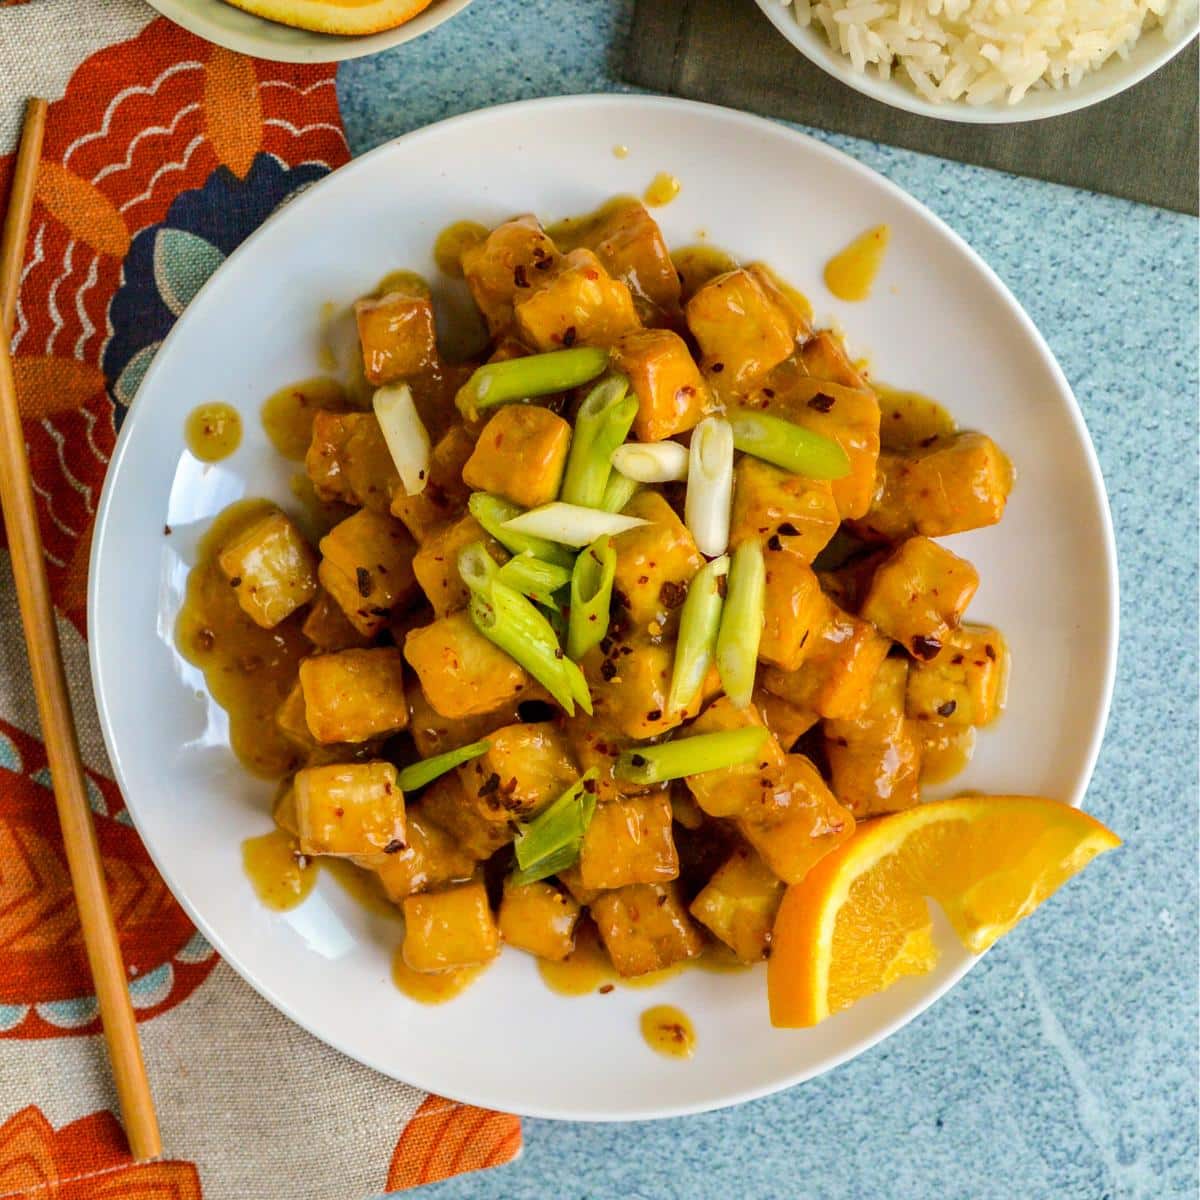 Platter of crispy tofu cubes tossed in orange sauce and garnished with green onions.